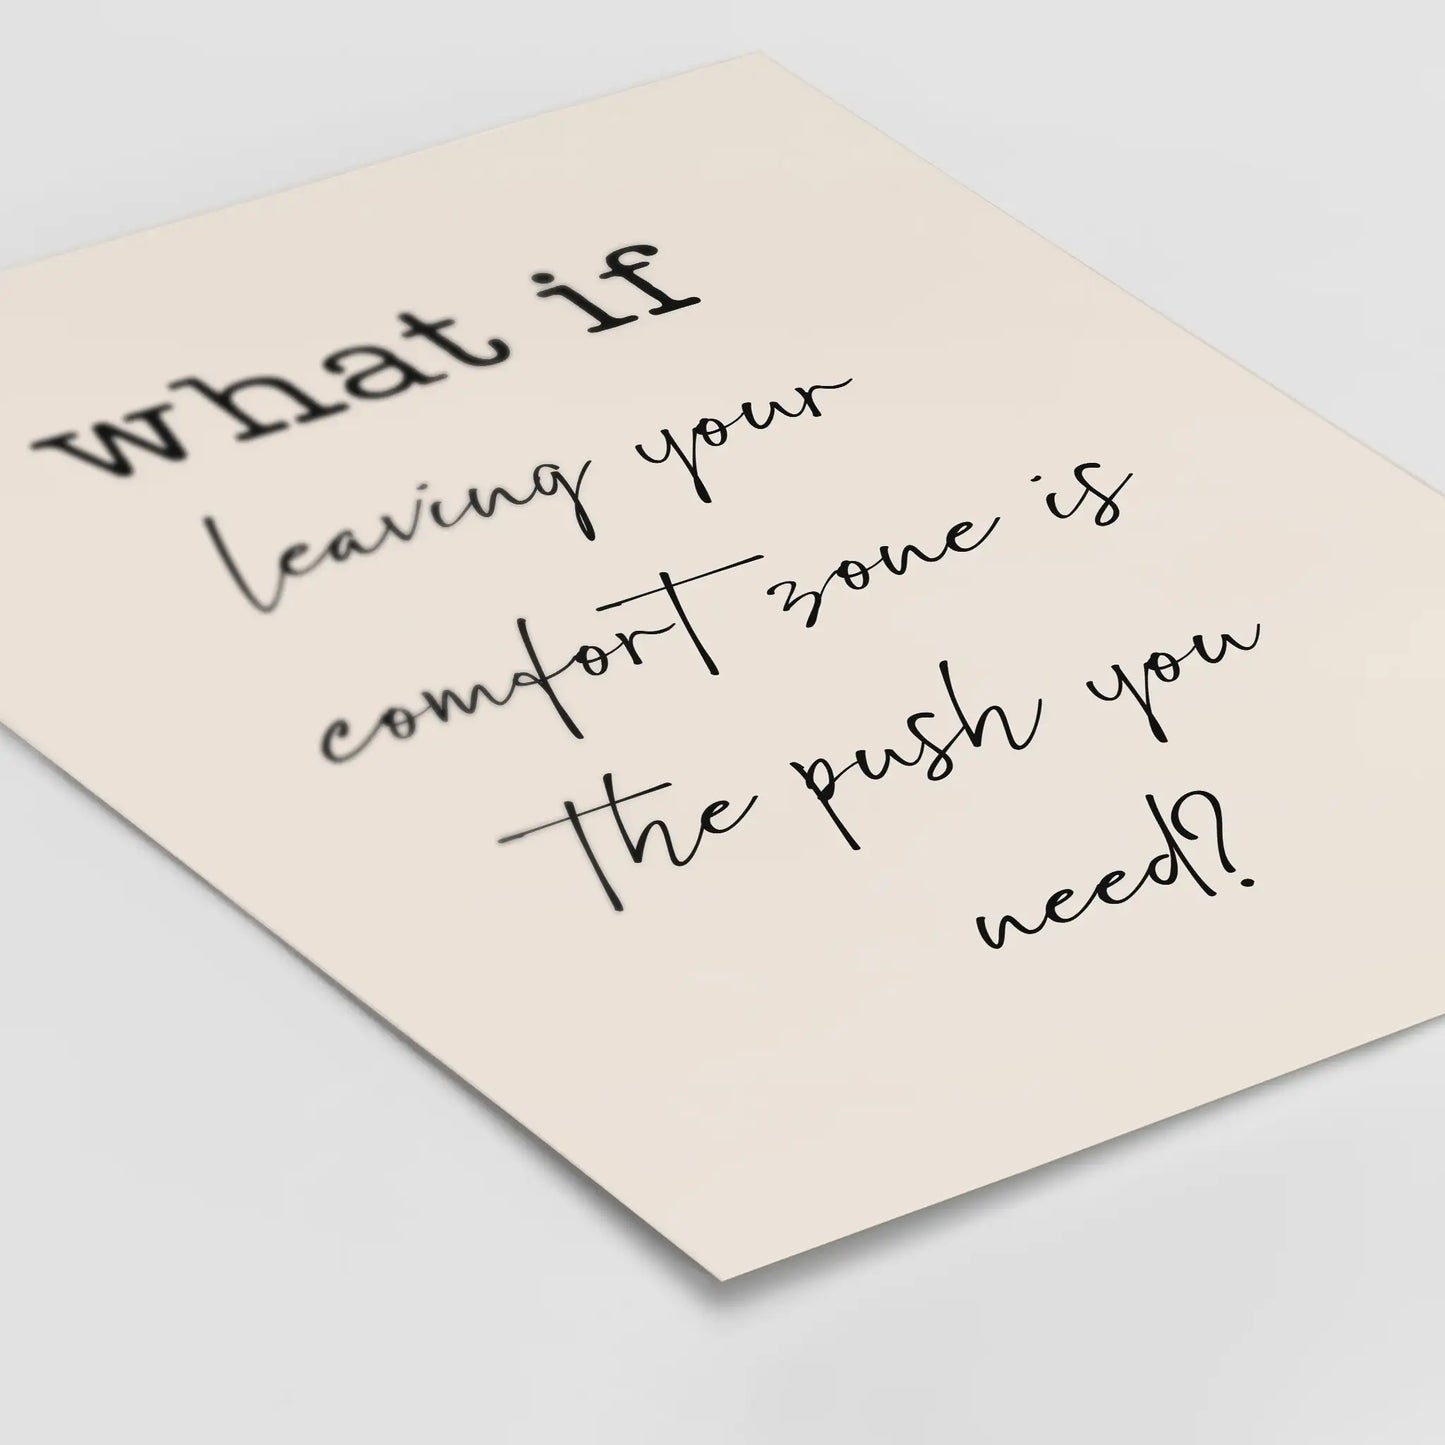 WHAT IF leaving your comfort zone is the push you need? - Poster